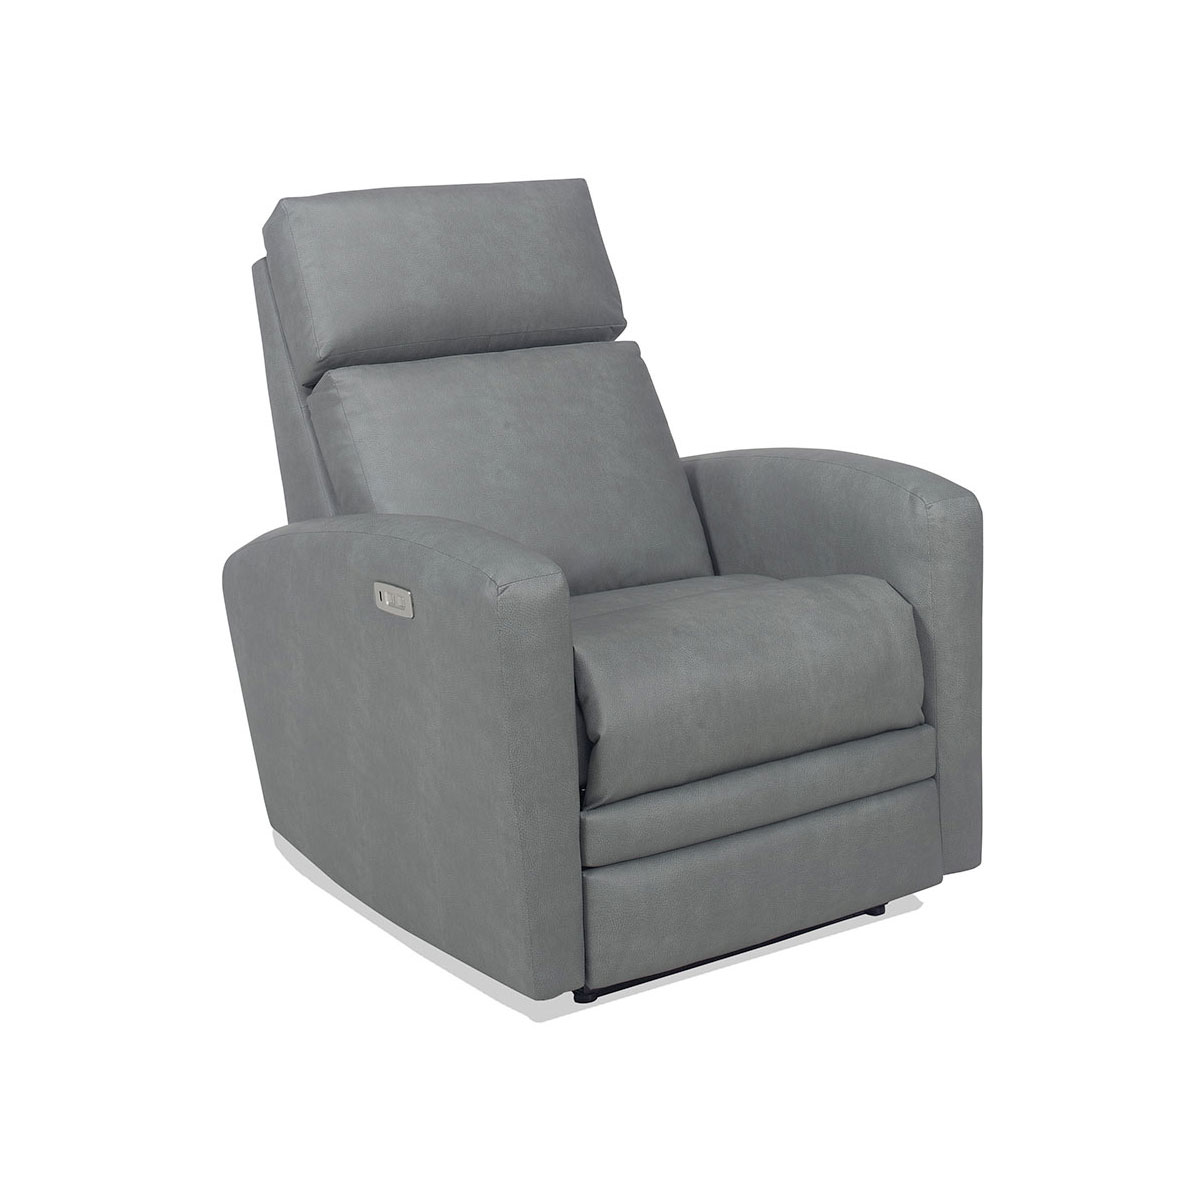 Temple Furniture 19007-T Fleek Recliner with Track Arm